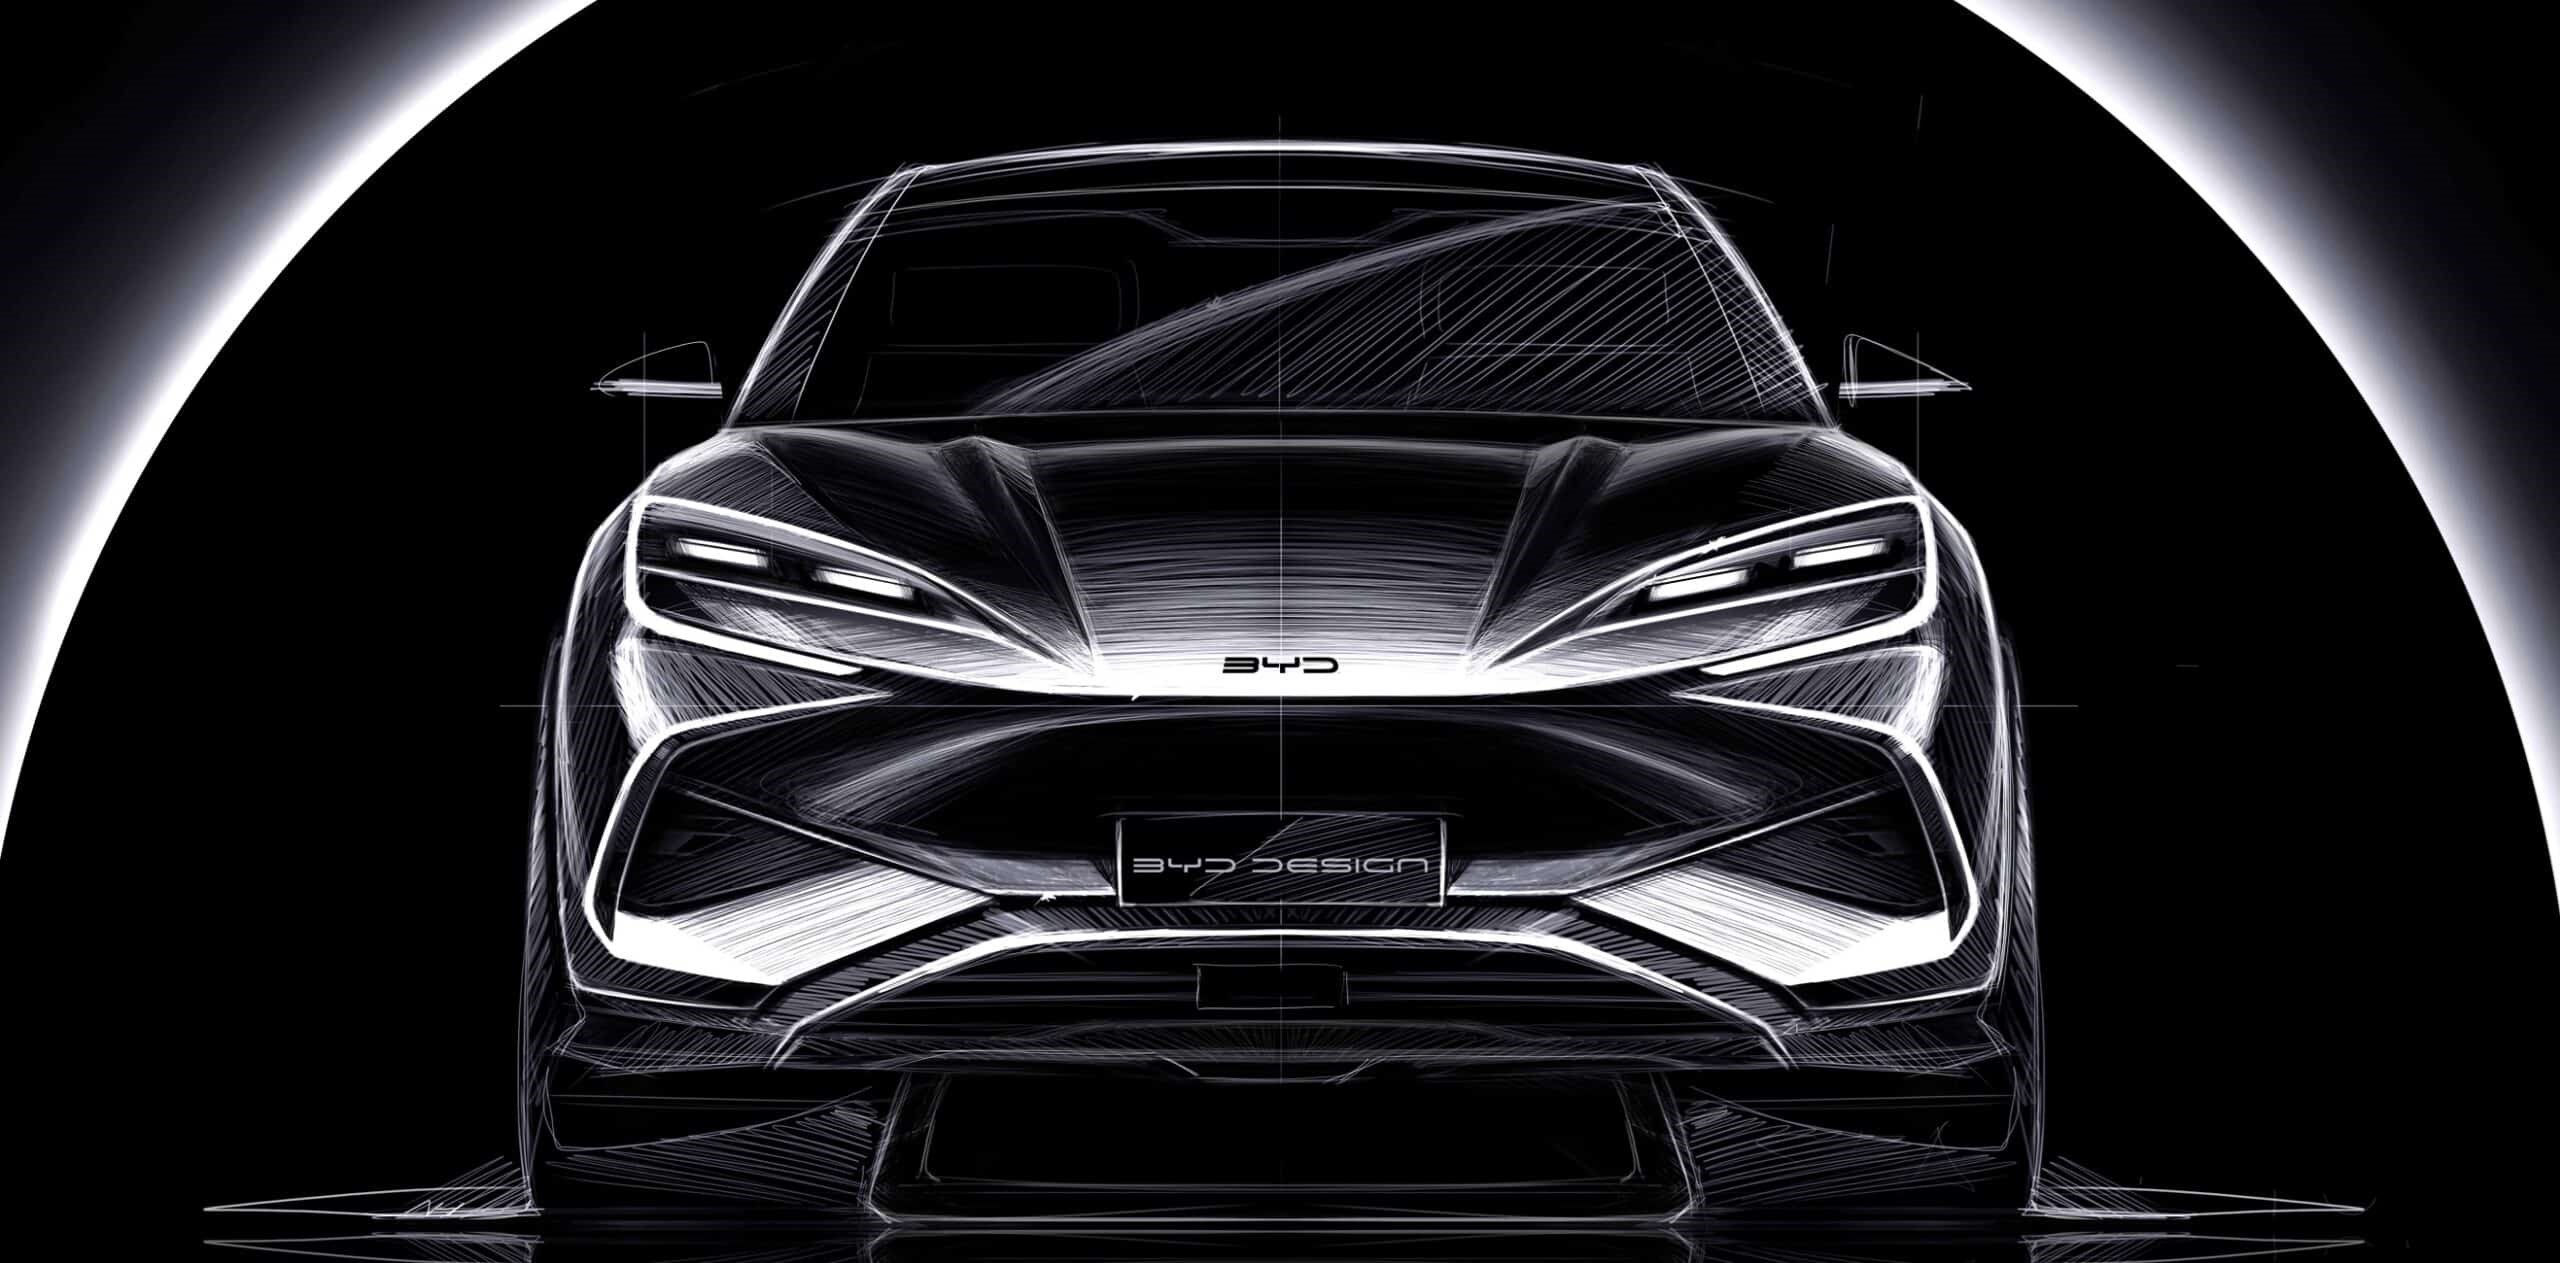 The Car: The Chinese BYD car comes with another amazing model